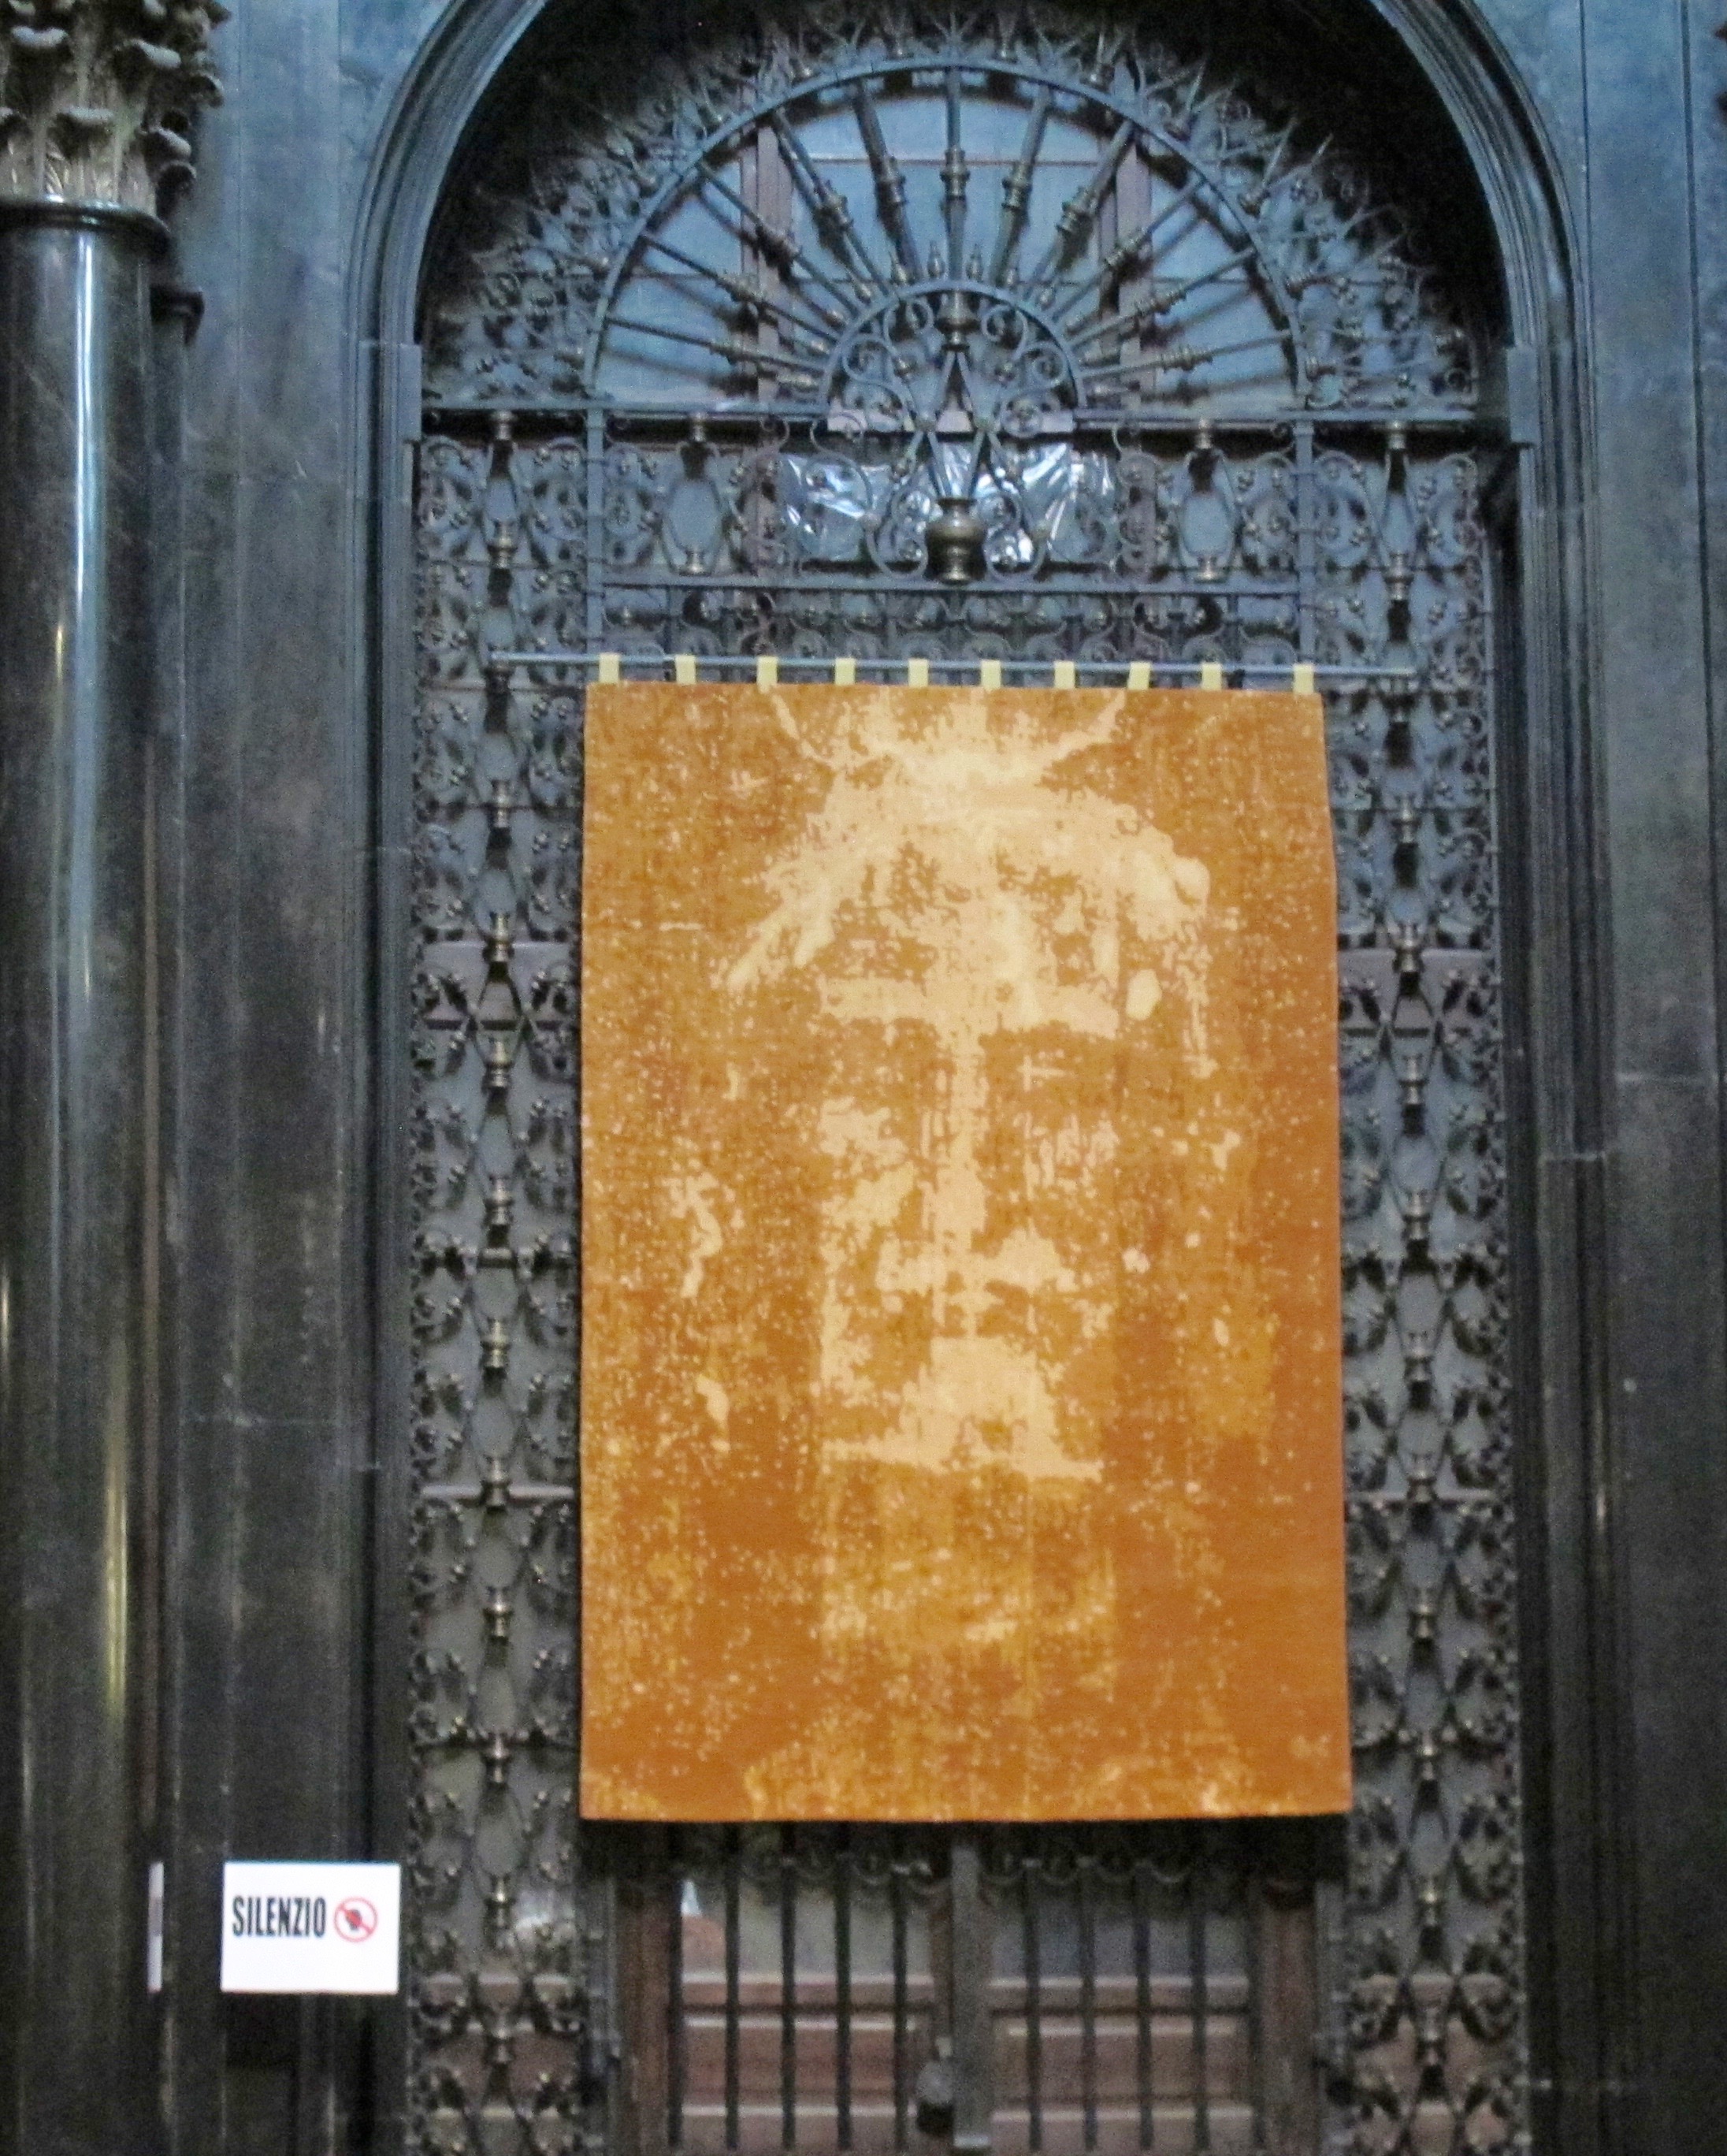 The Shroud of Turin is maintained in the Duomo de San Giovanni. Photo by Marla Norman